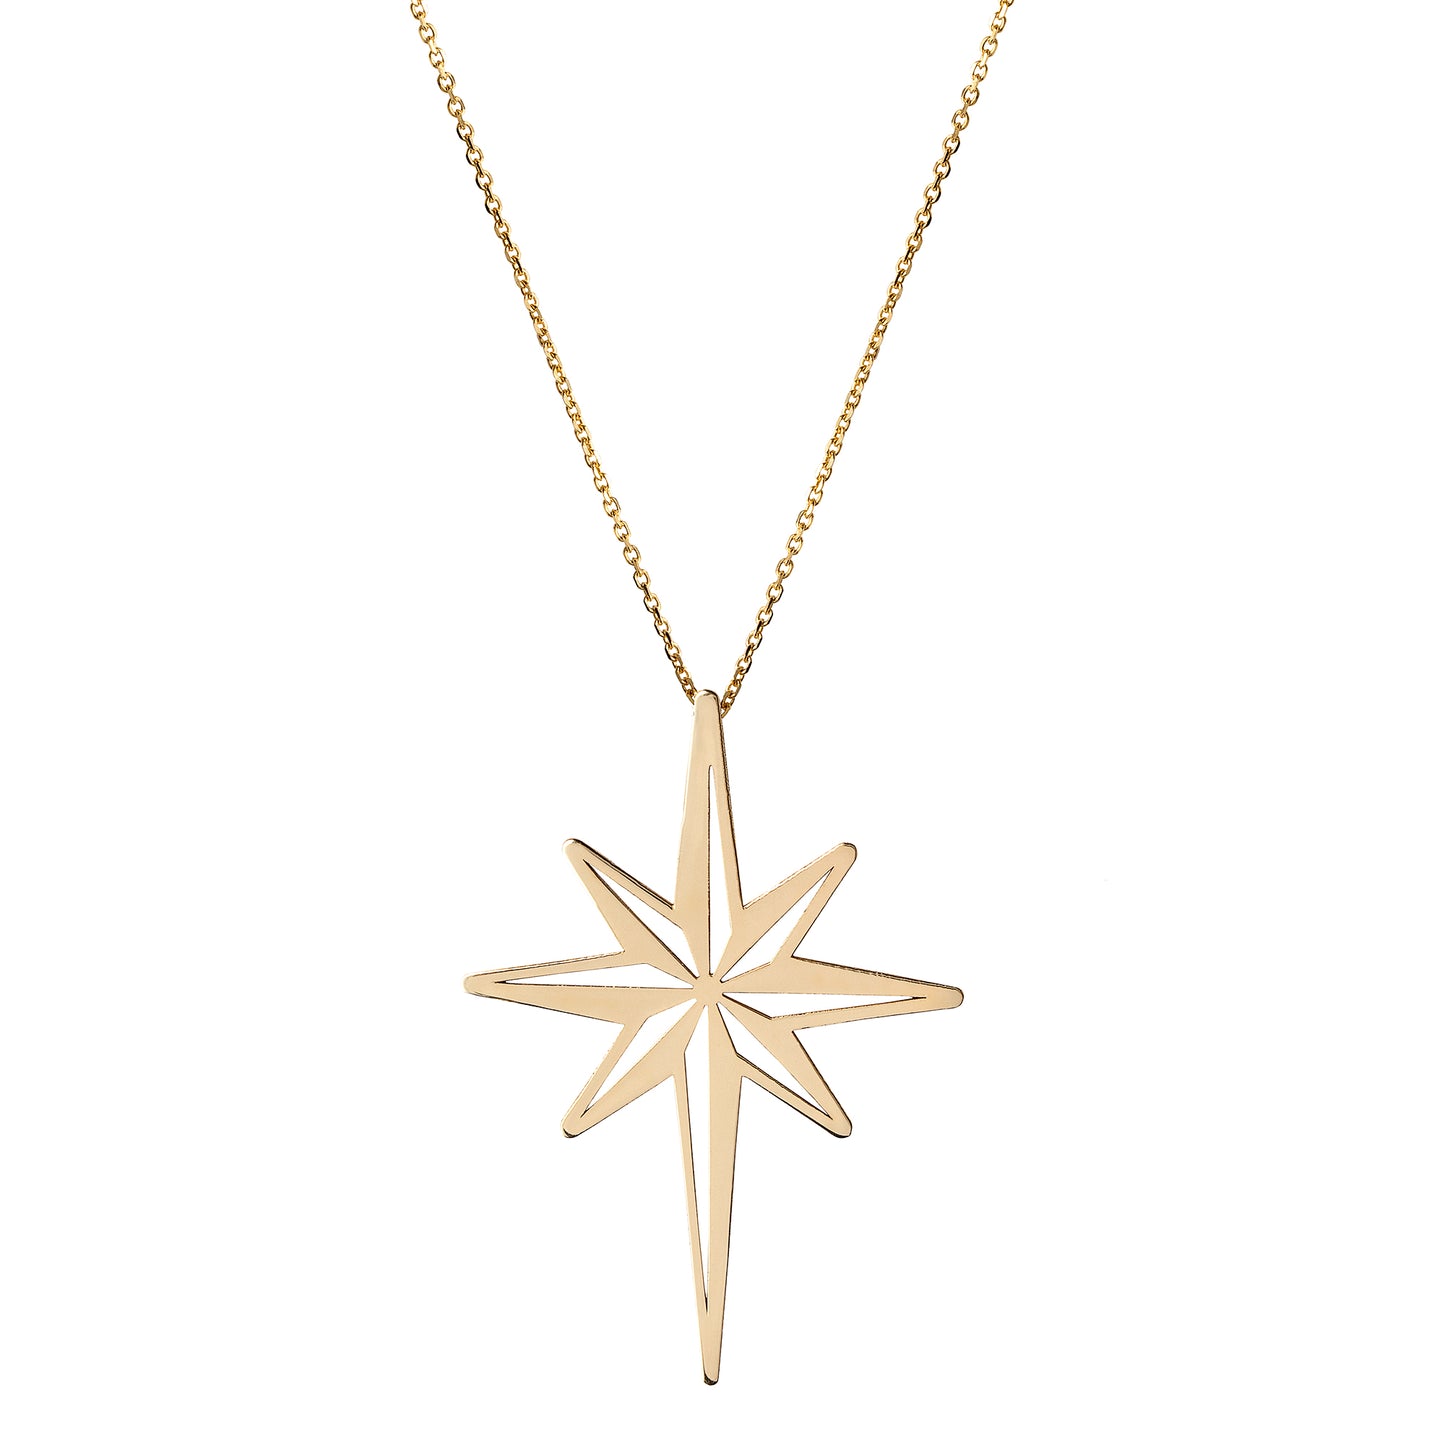 The 8 Pointed Star Necklace